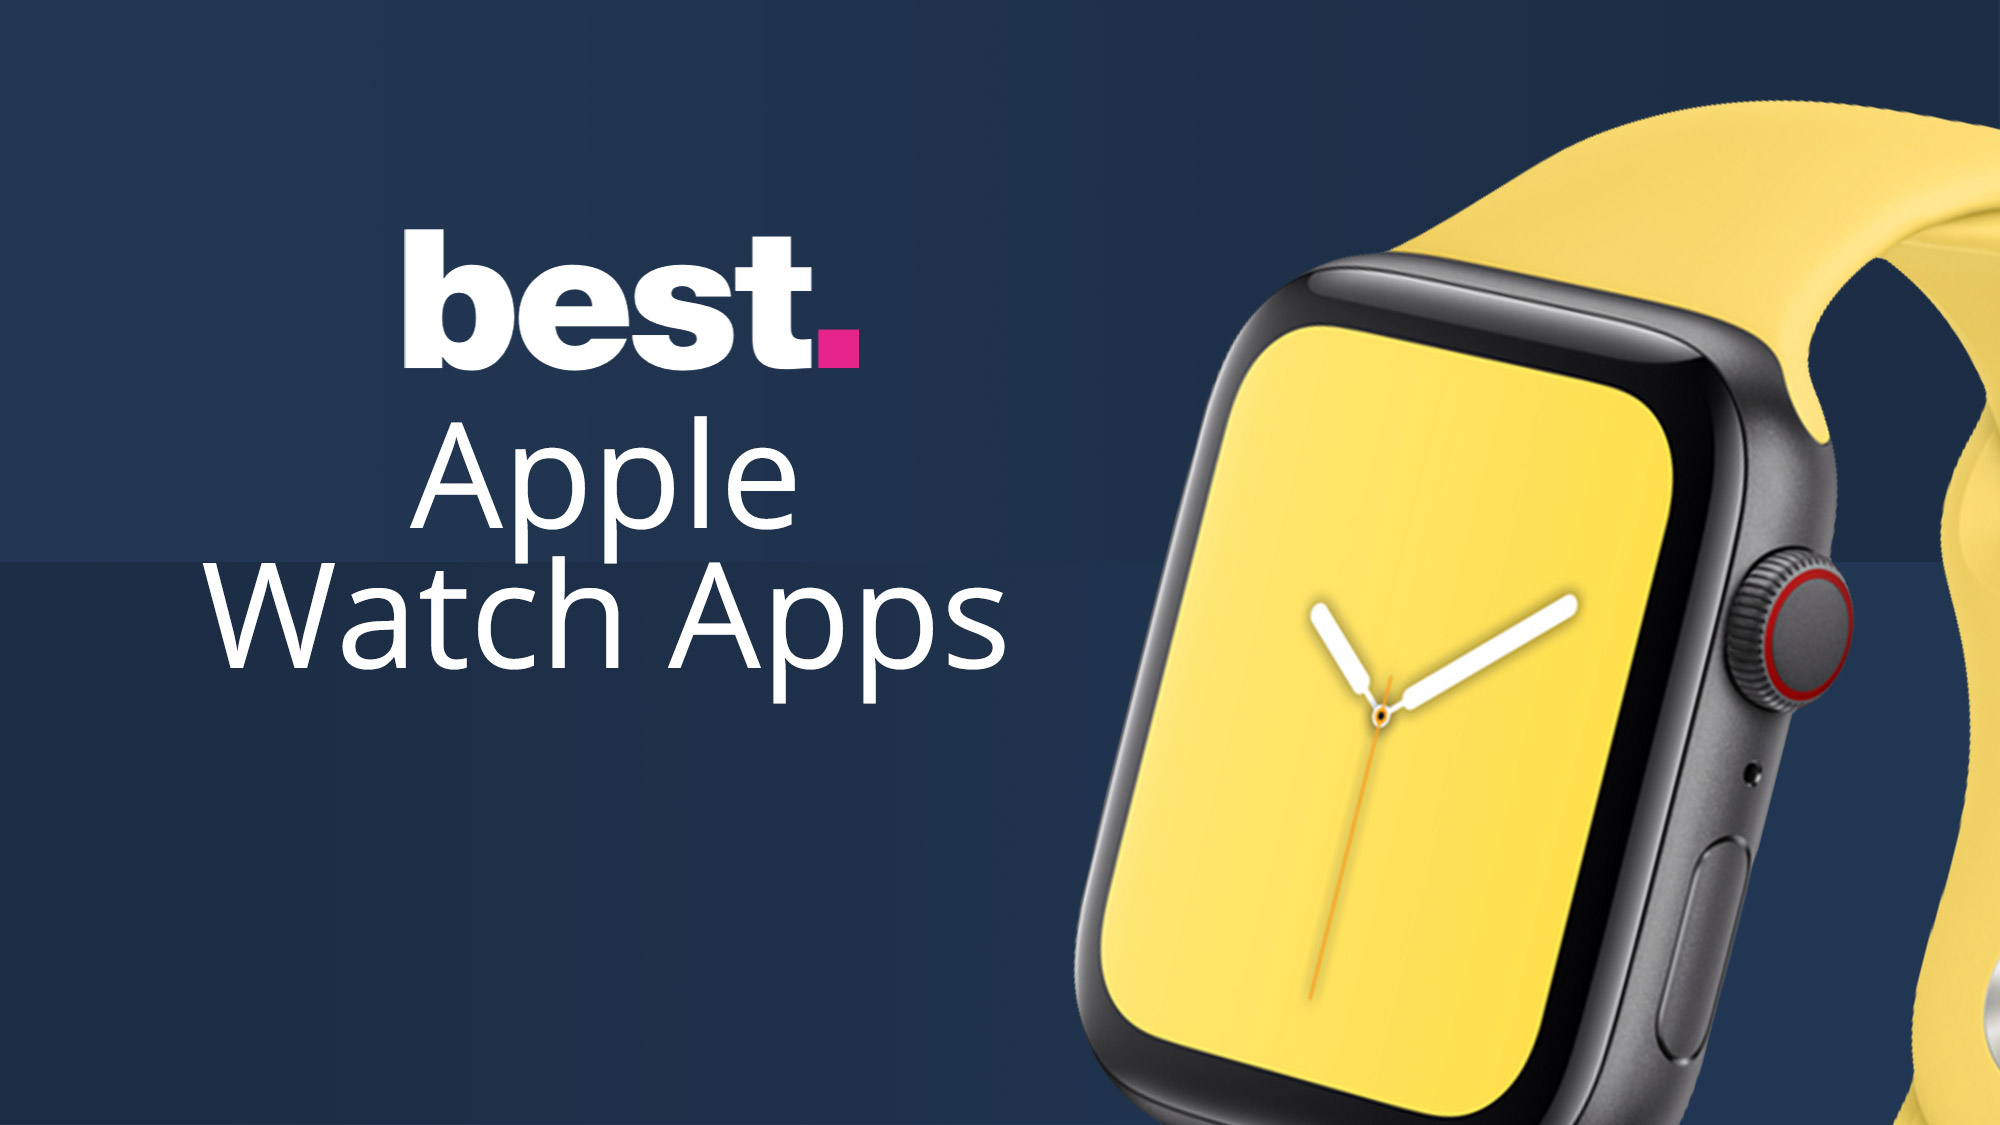 Can You Use Snapchat On Apple Watch Series 5 Best Apple Watch Apps For Photo And Video The Best Apple Watch Apps We Ve Used In 2020 Techradar